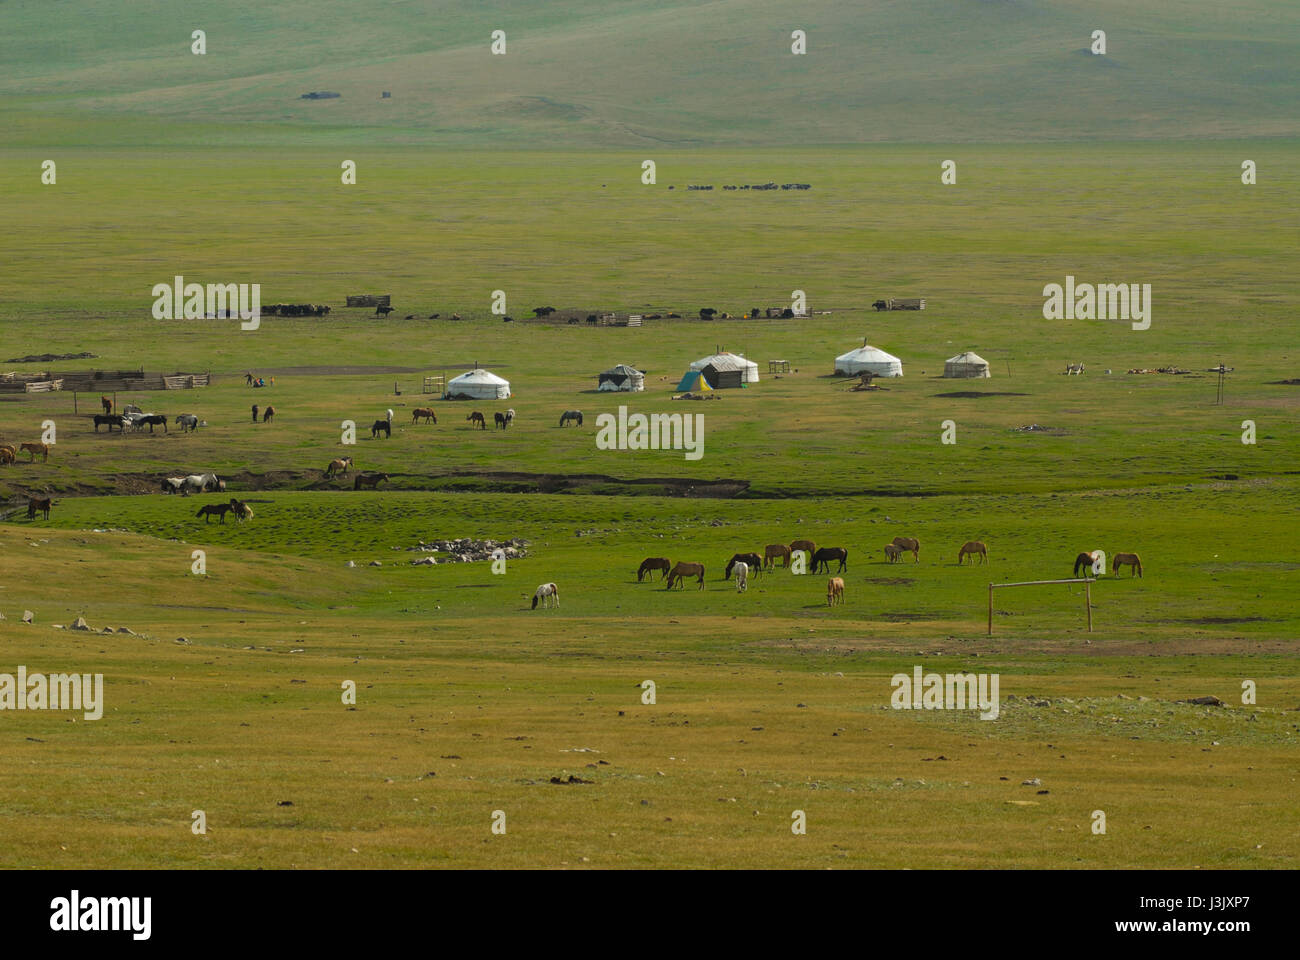 Steppe with yurts and horses in mongolia Stock Photo